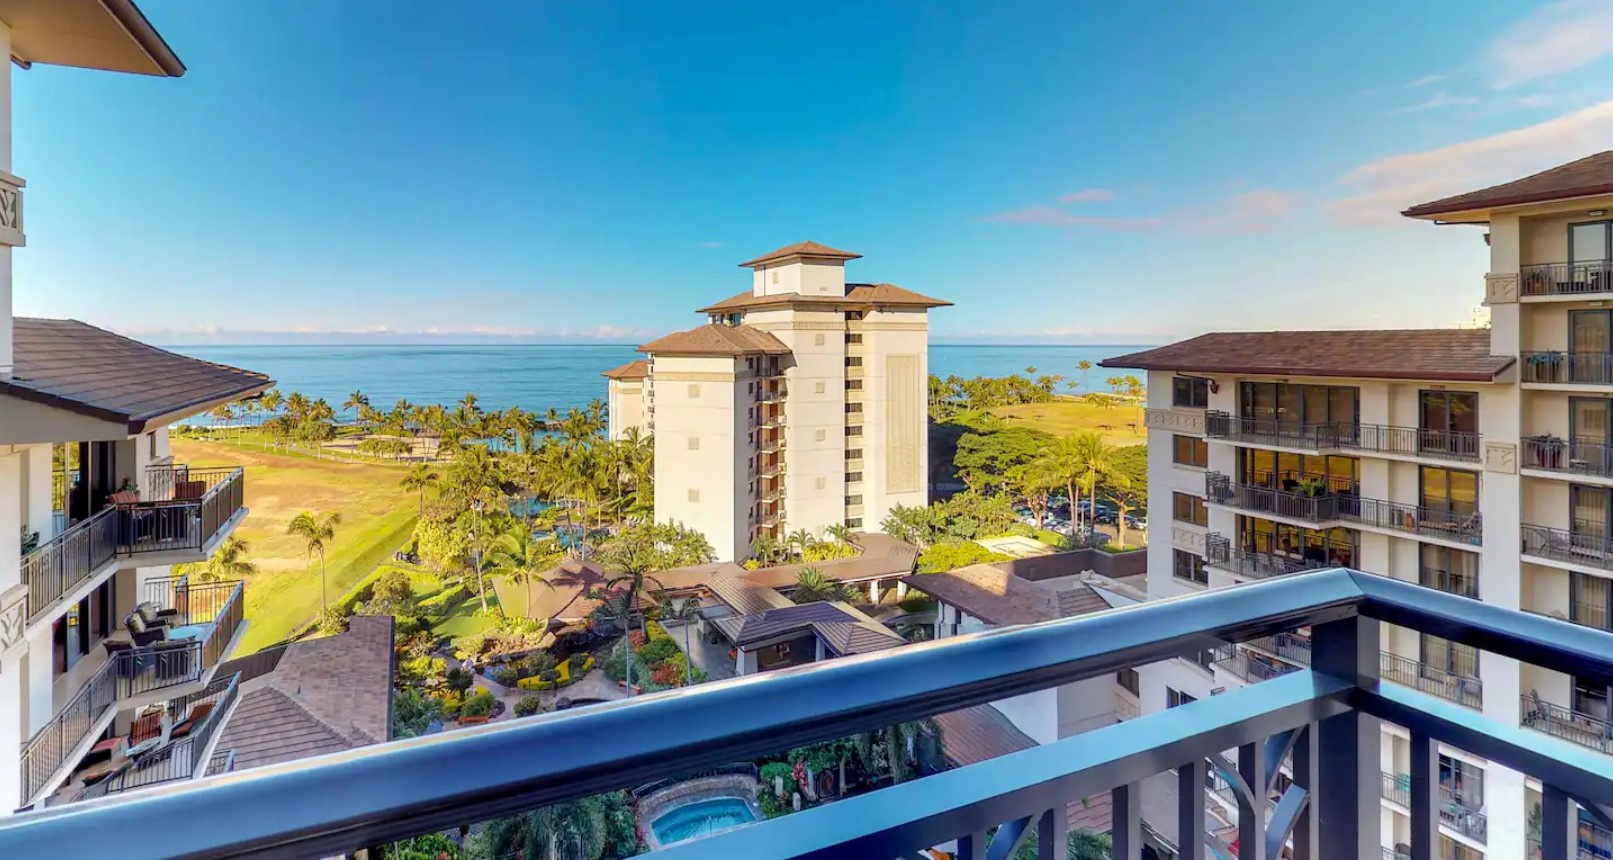 Kapolei Vacation Rentals, Ko Olina Beach Villas O1006 - A spectacular view of the ocean and golf course from the lanai.